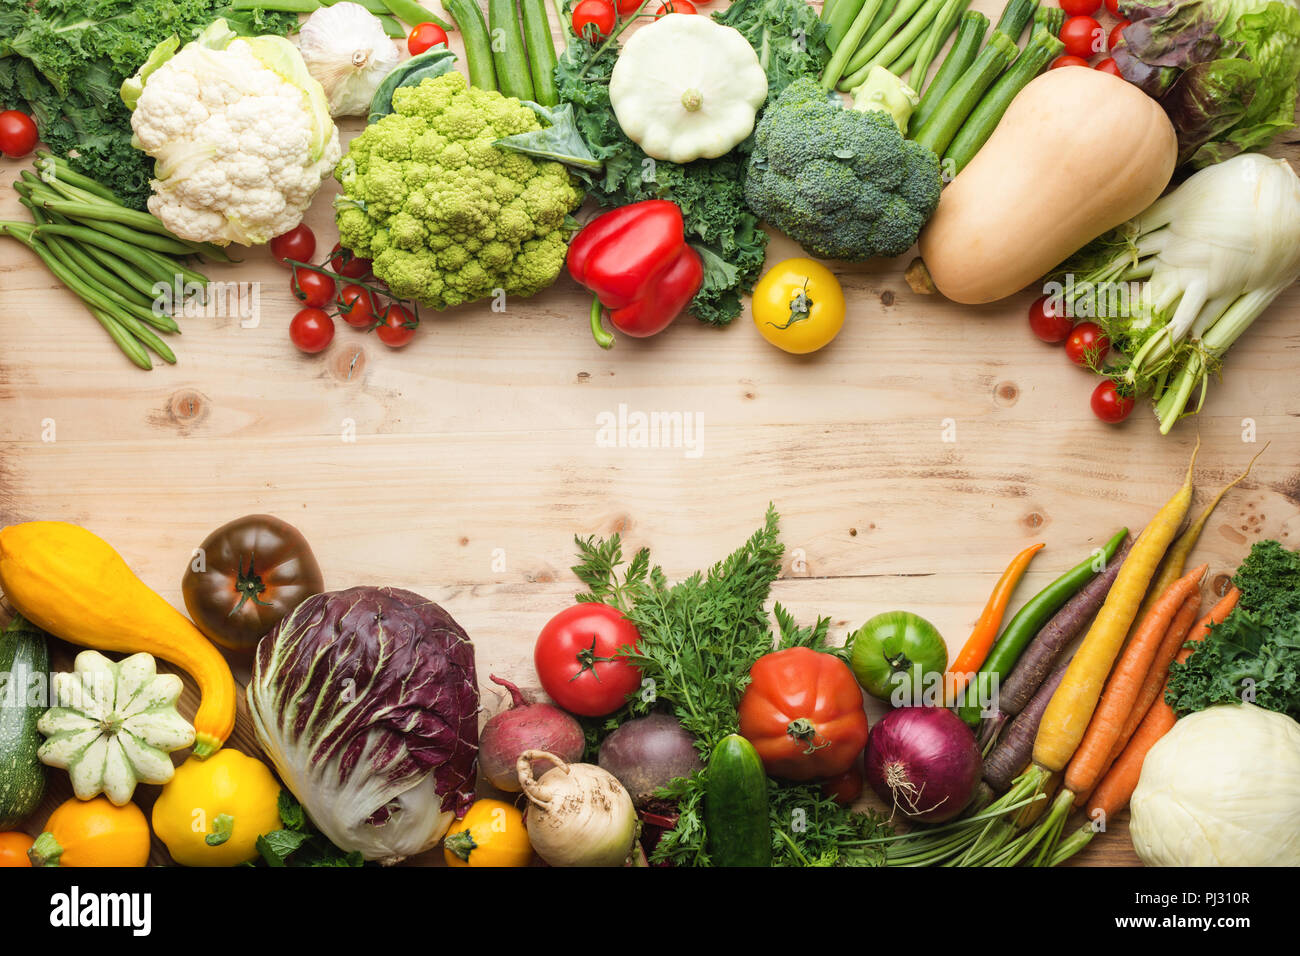 Fresh farm produce, organic vegetables and herbs on pine wooden table, healthy background, copy space for text in the middle, top view, selective focus Stock Photo